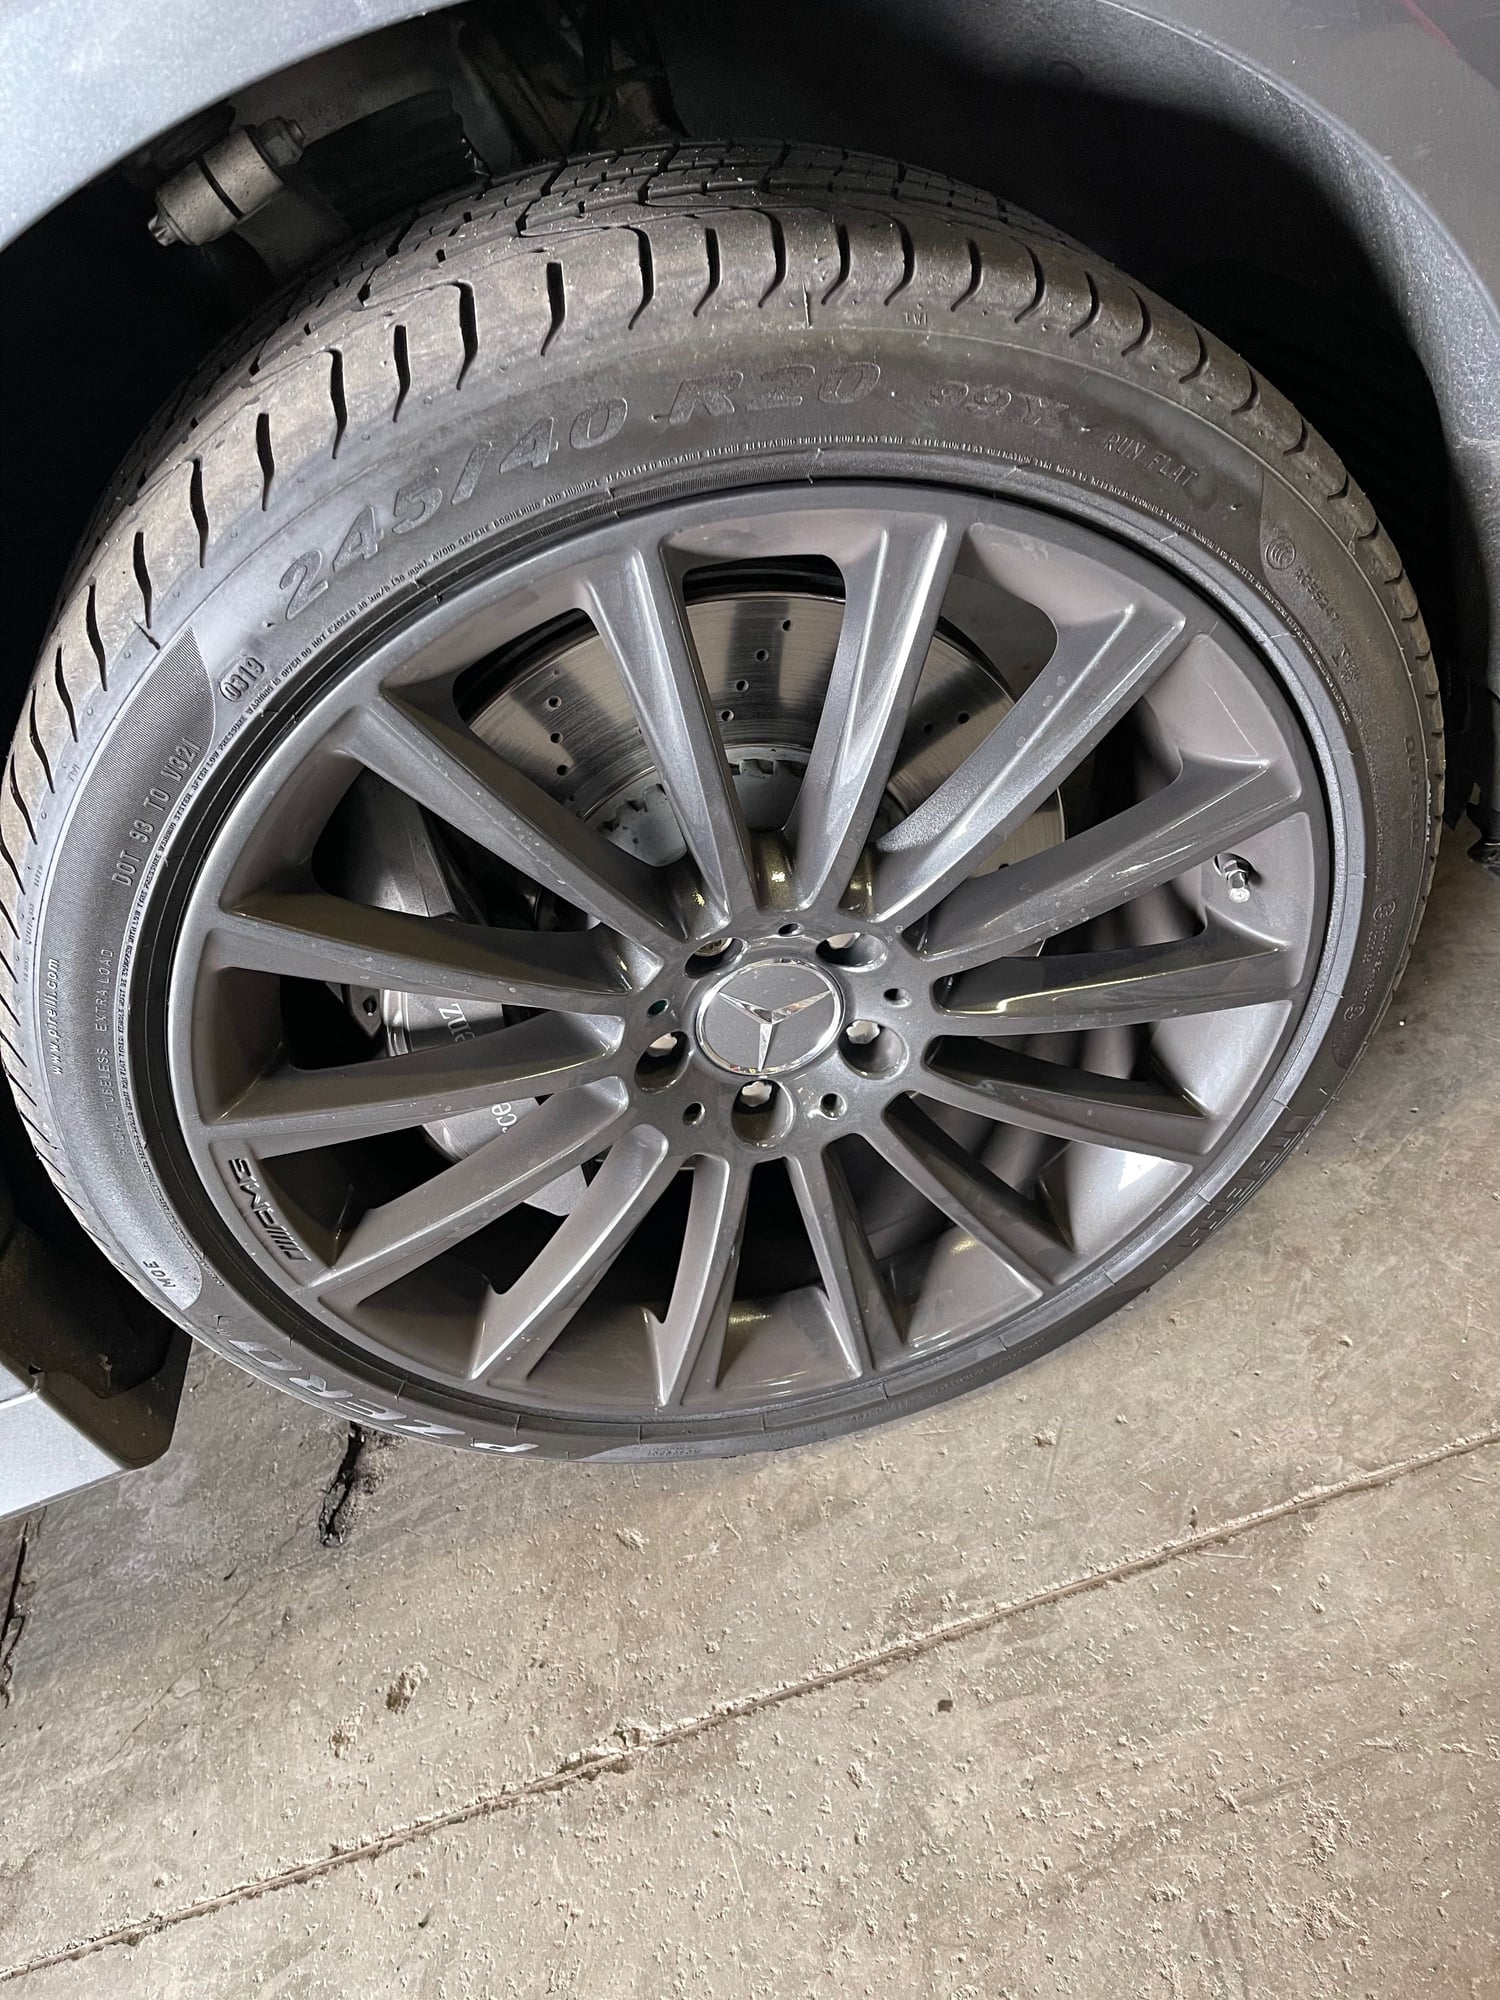 Wheels and Tires/Axles - AMG original 20 inch wheels / tires : 245/40 front 275/35 rear Pirelli MINT - Used - 0  All Models - Aurora, CO 80016, United States